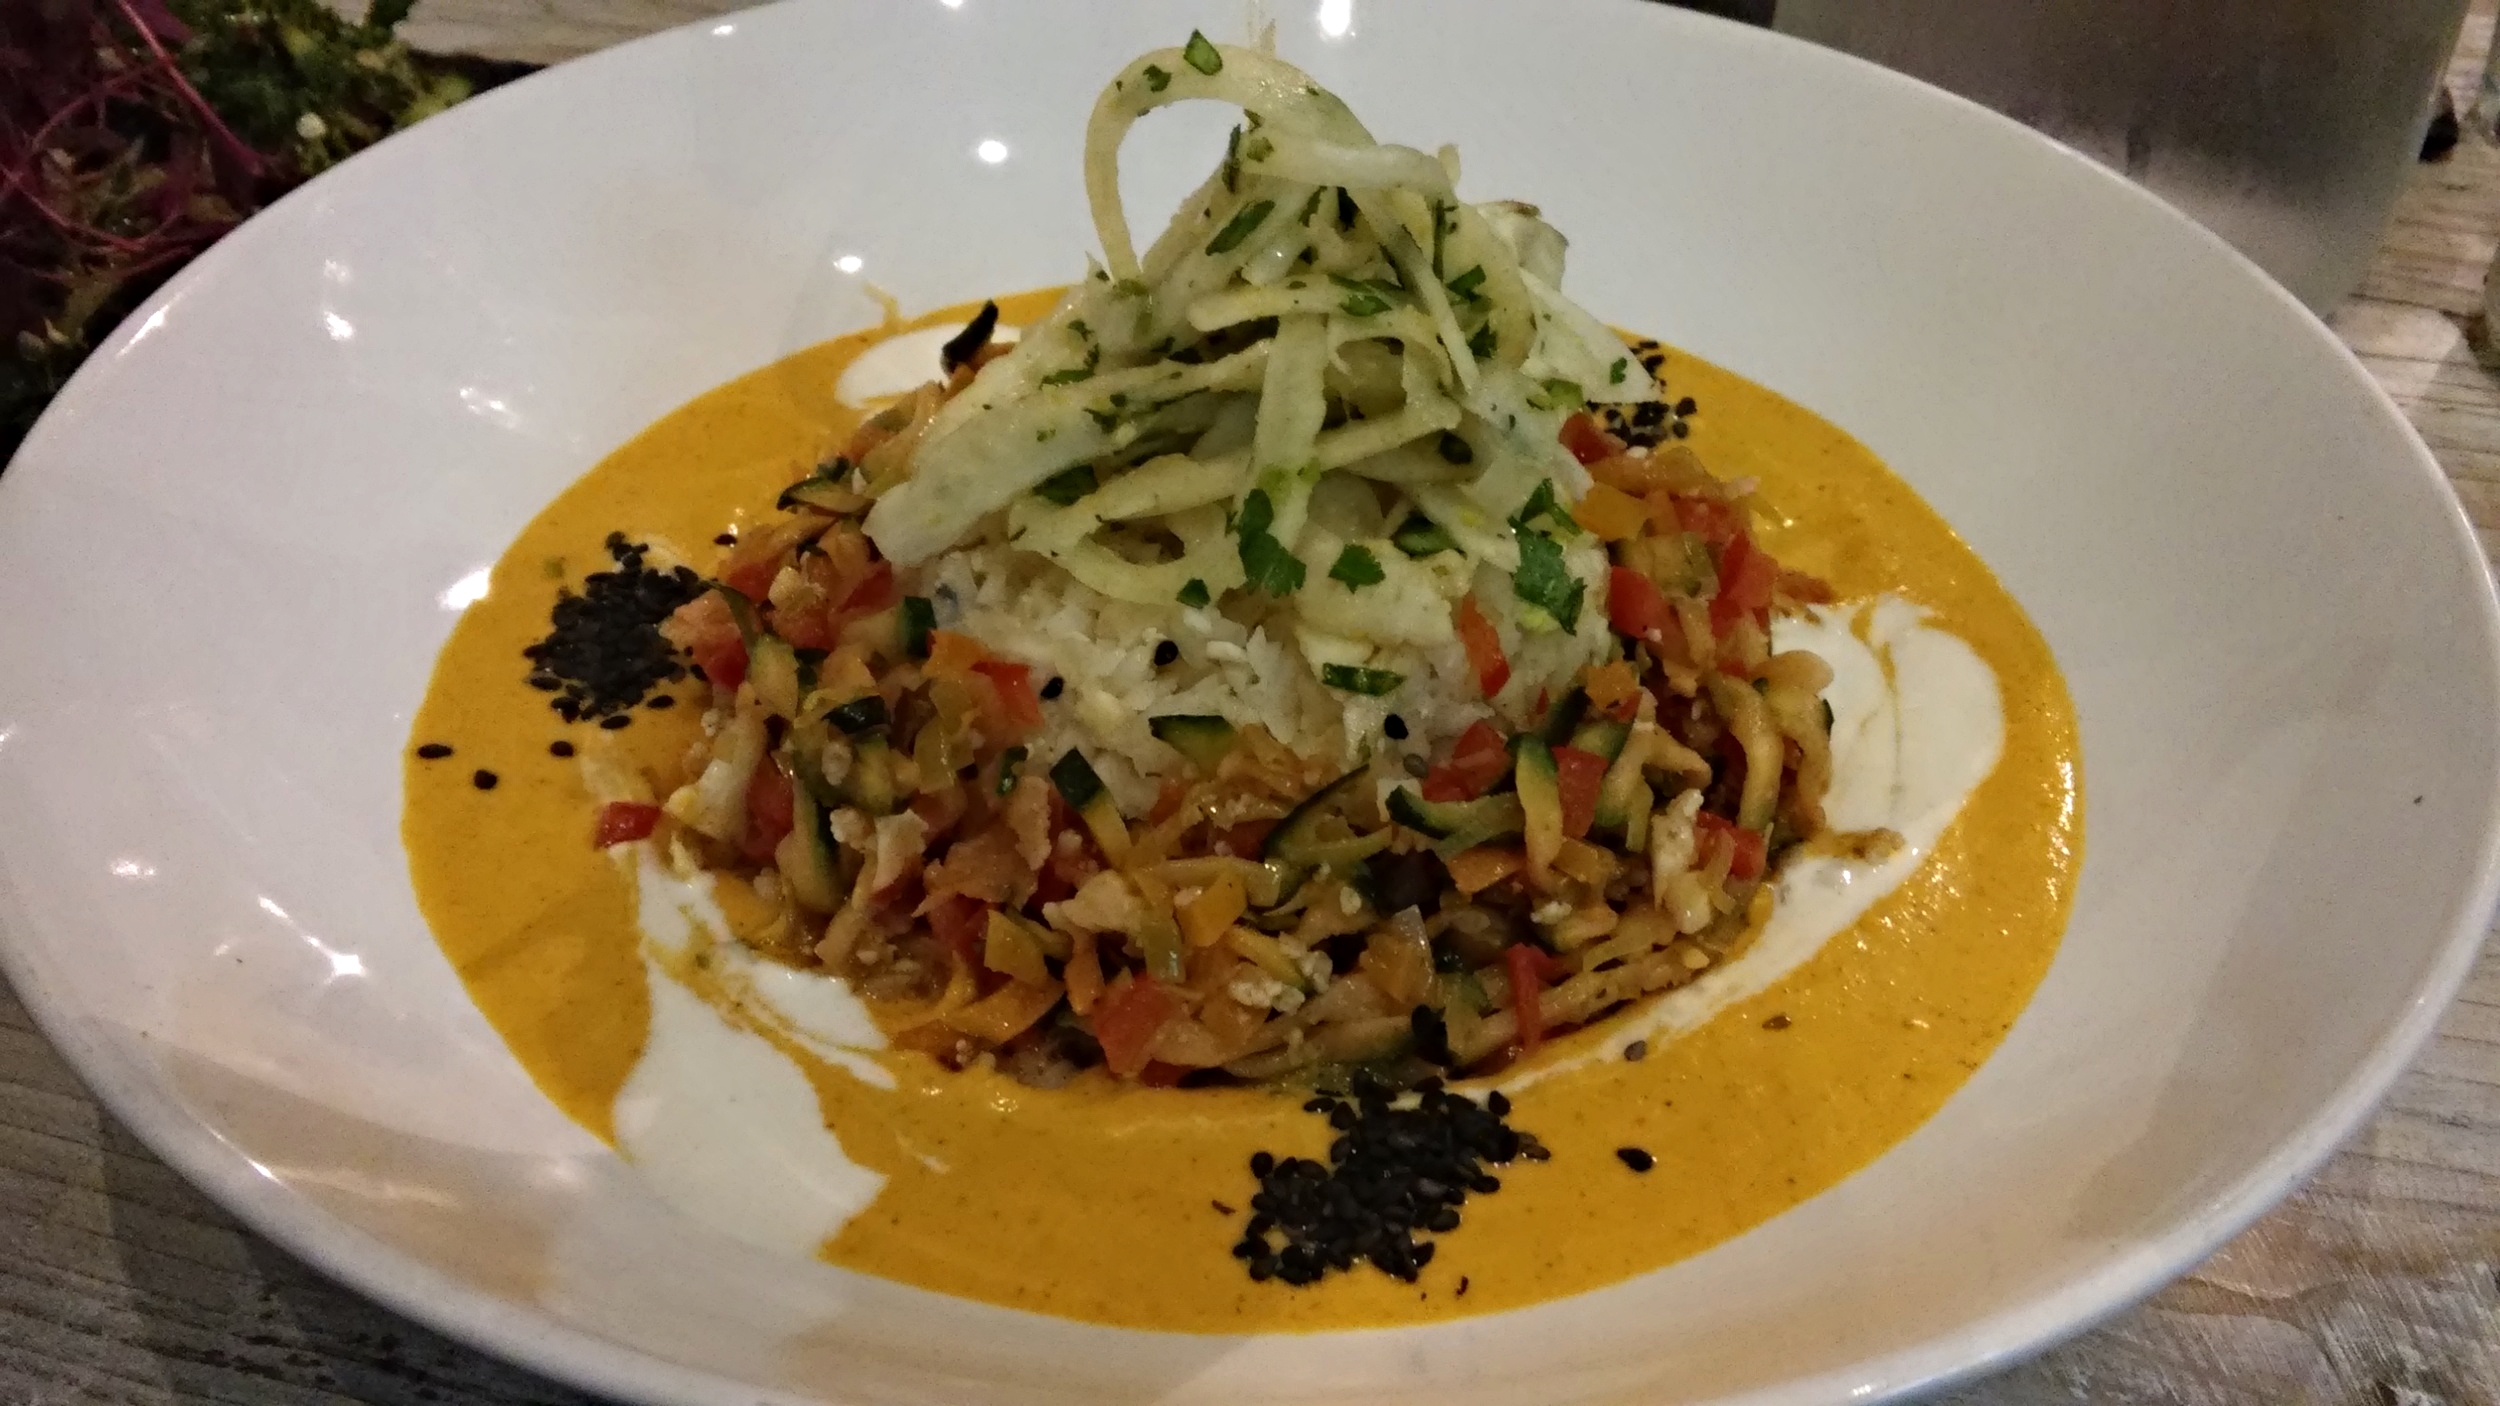 Thai Coconut Curry - Cauliflower, courgette, red pepper & leek marinated in a sweet chilli sauce, served with a coconut currym kohlrabi rice and pickled fennel